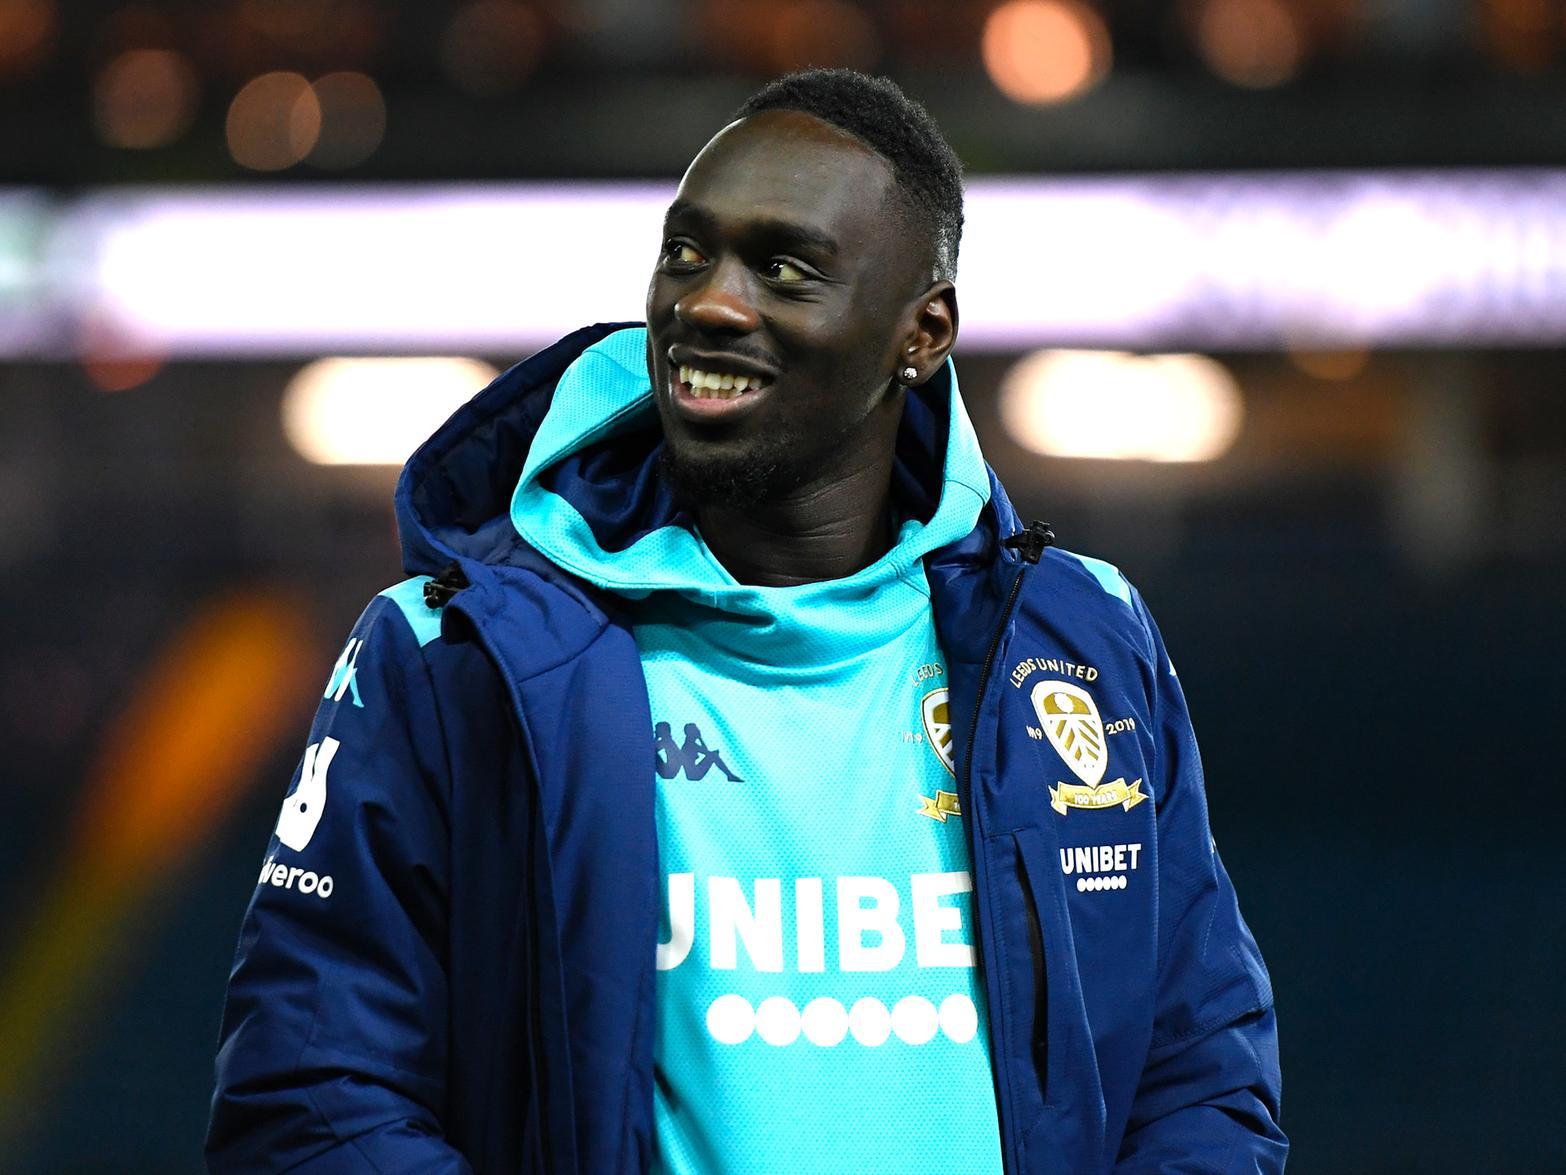 Leeds United's exciting new signing Jean-Kevin Augustin has revealed that he had already decided to join the club before hearing of interest from Manchester United, and would not have been swayed to go elsewhere. (Yorkshire Evening Post)